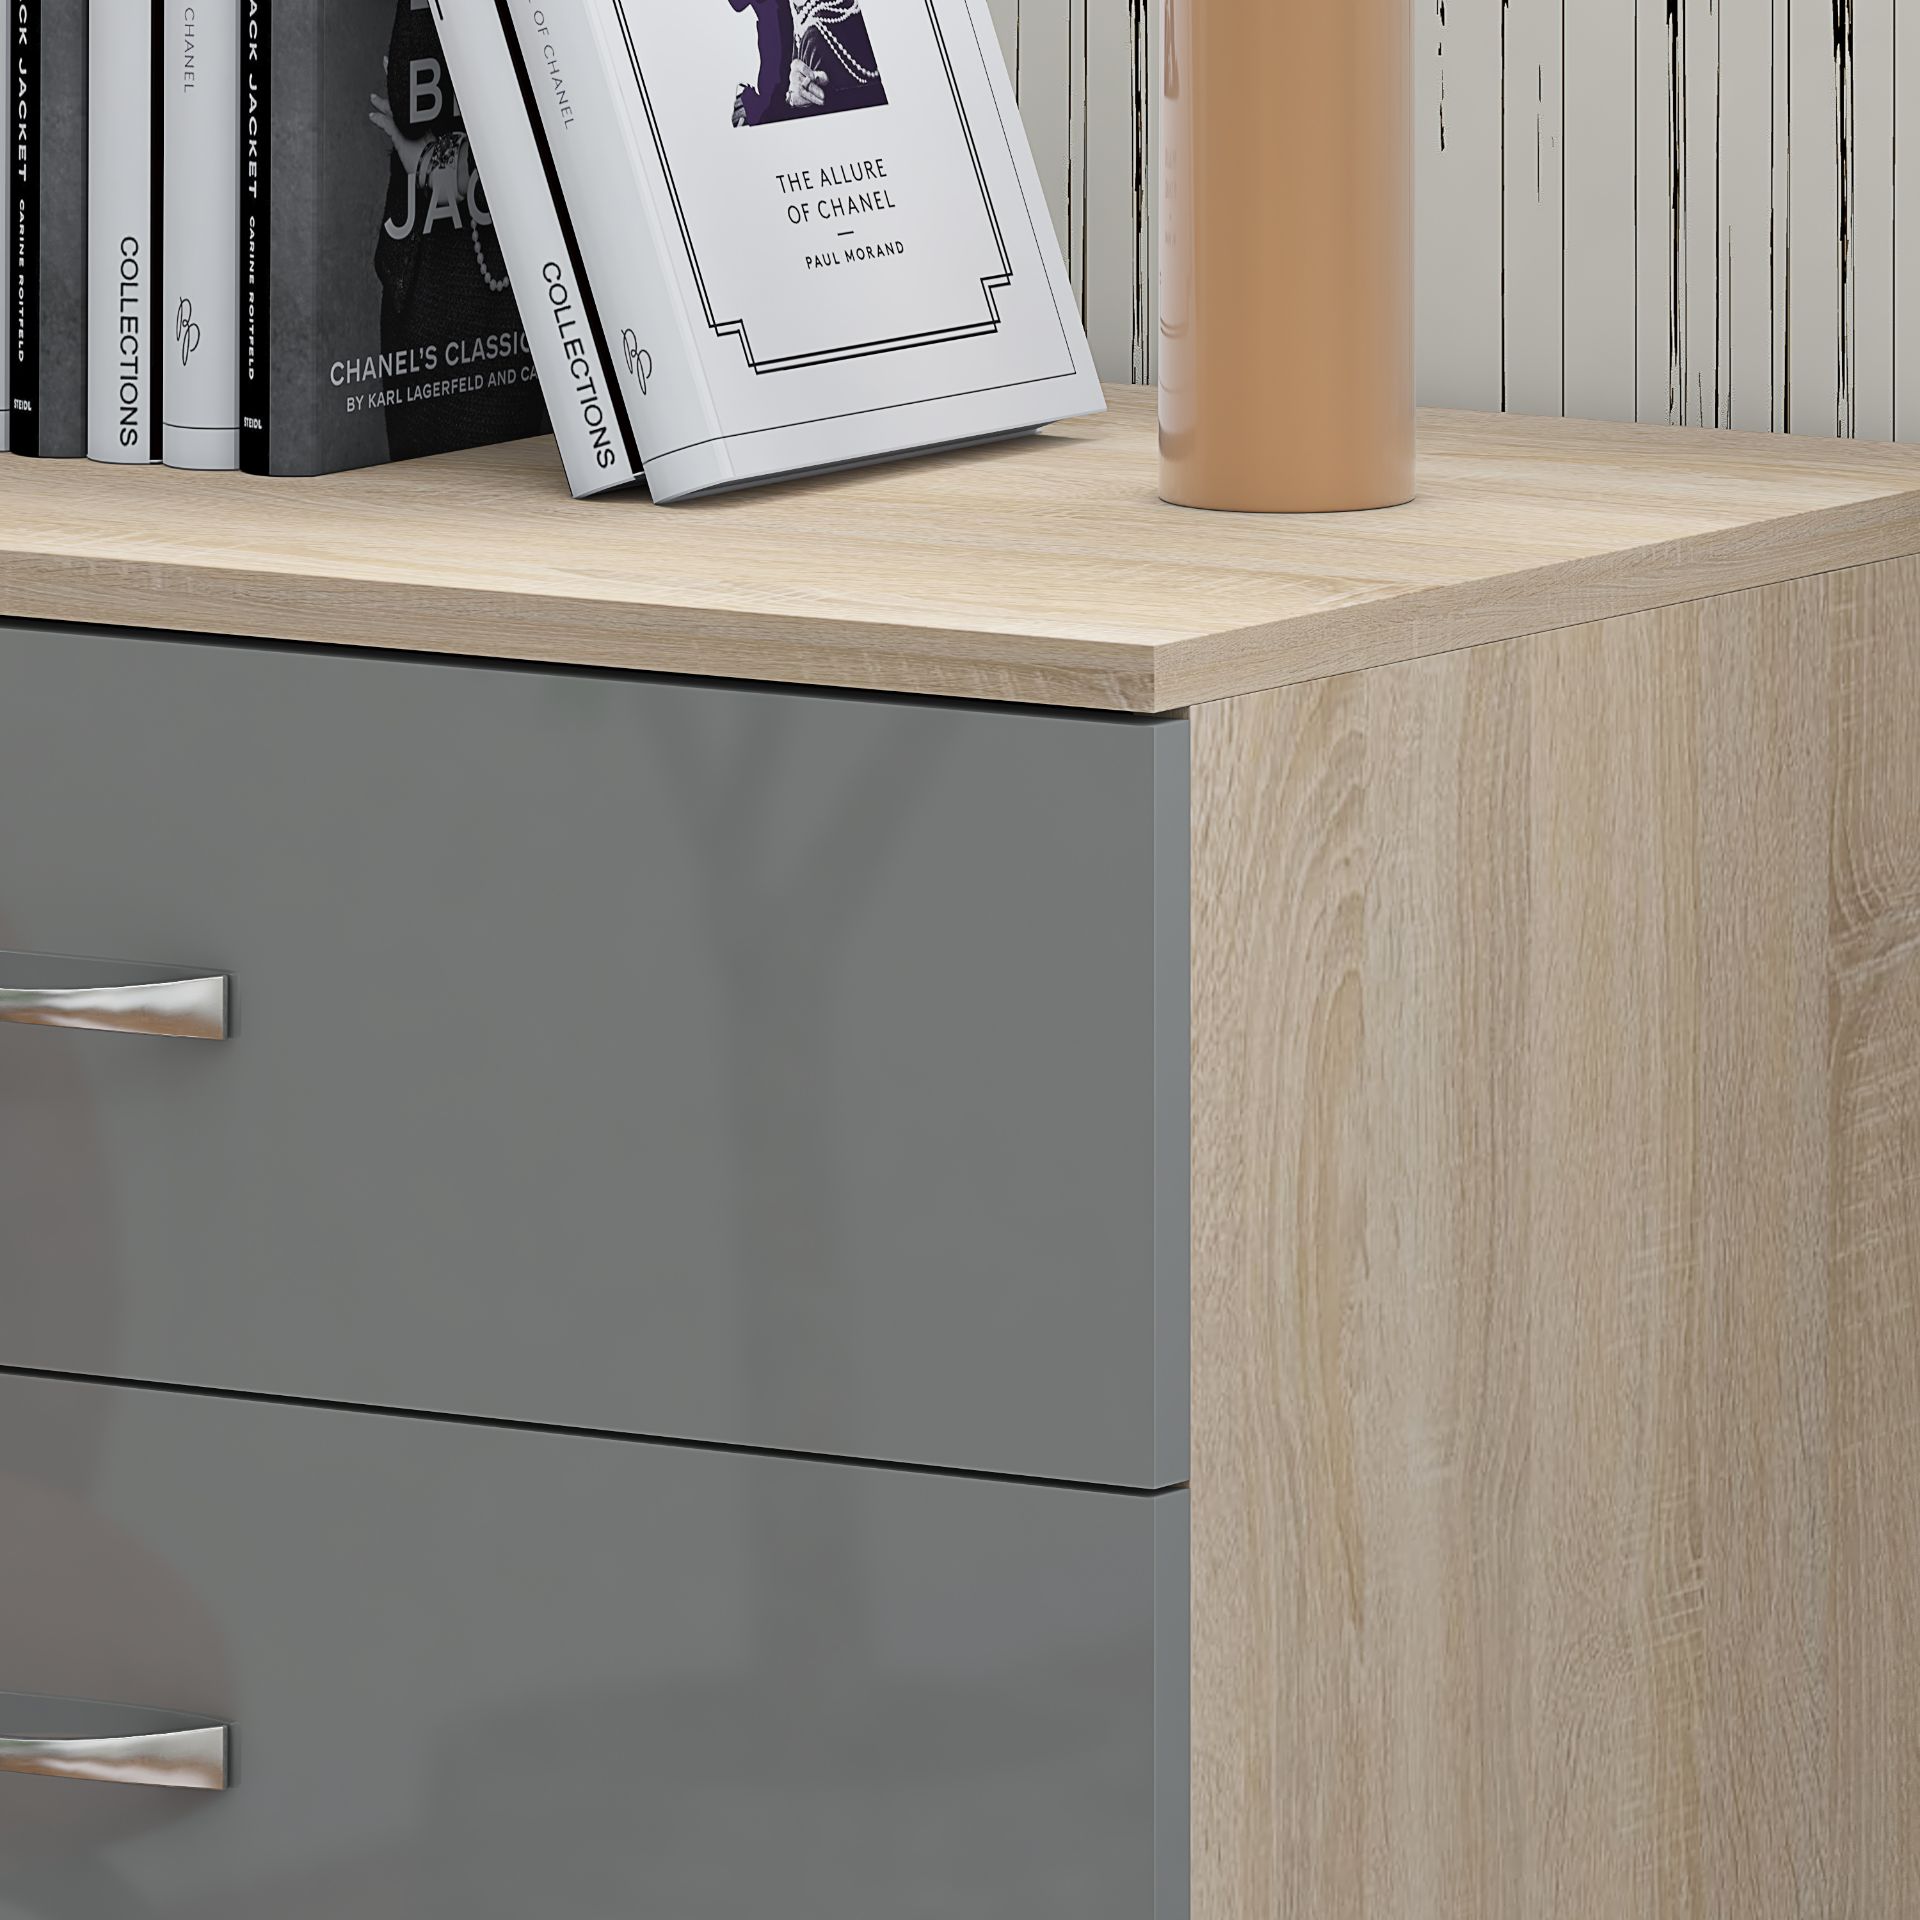 STUNNING CHEST OF DRAWERS X 2 - HIGH GLOSS GREY ON SONOMA OAK FRAME - Image 7 of 9